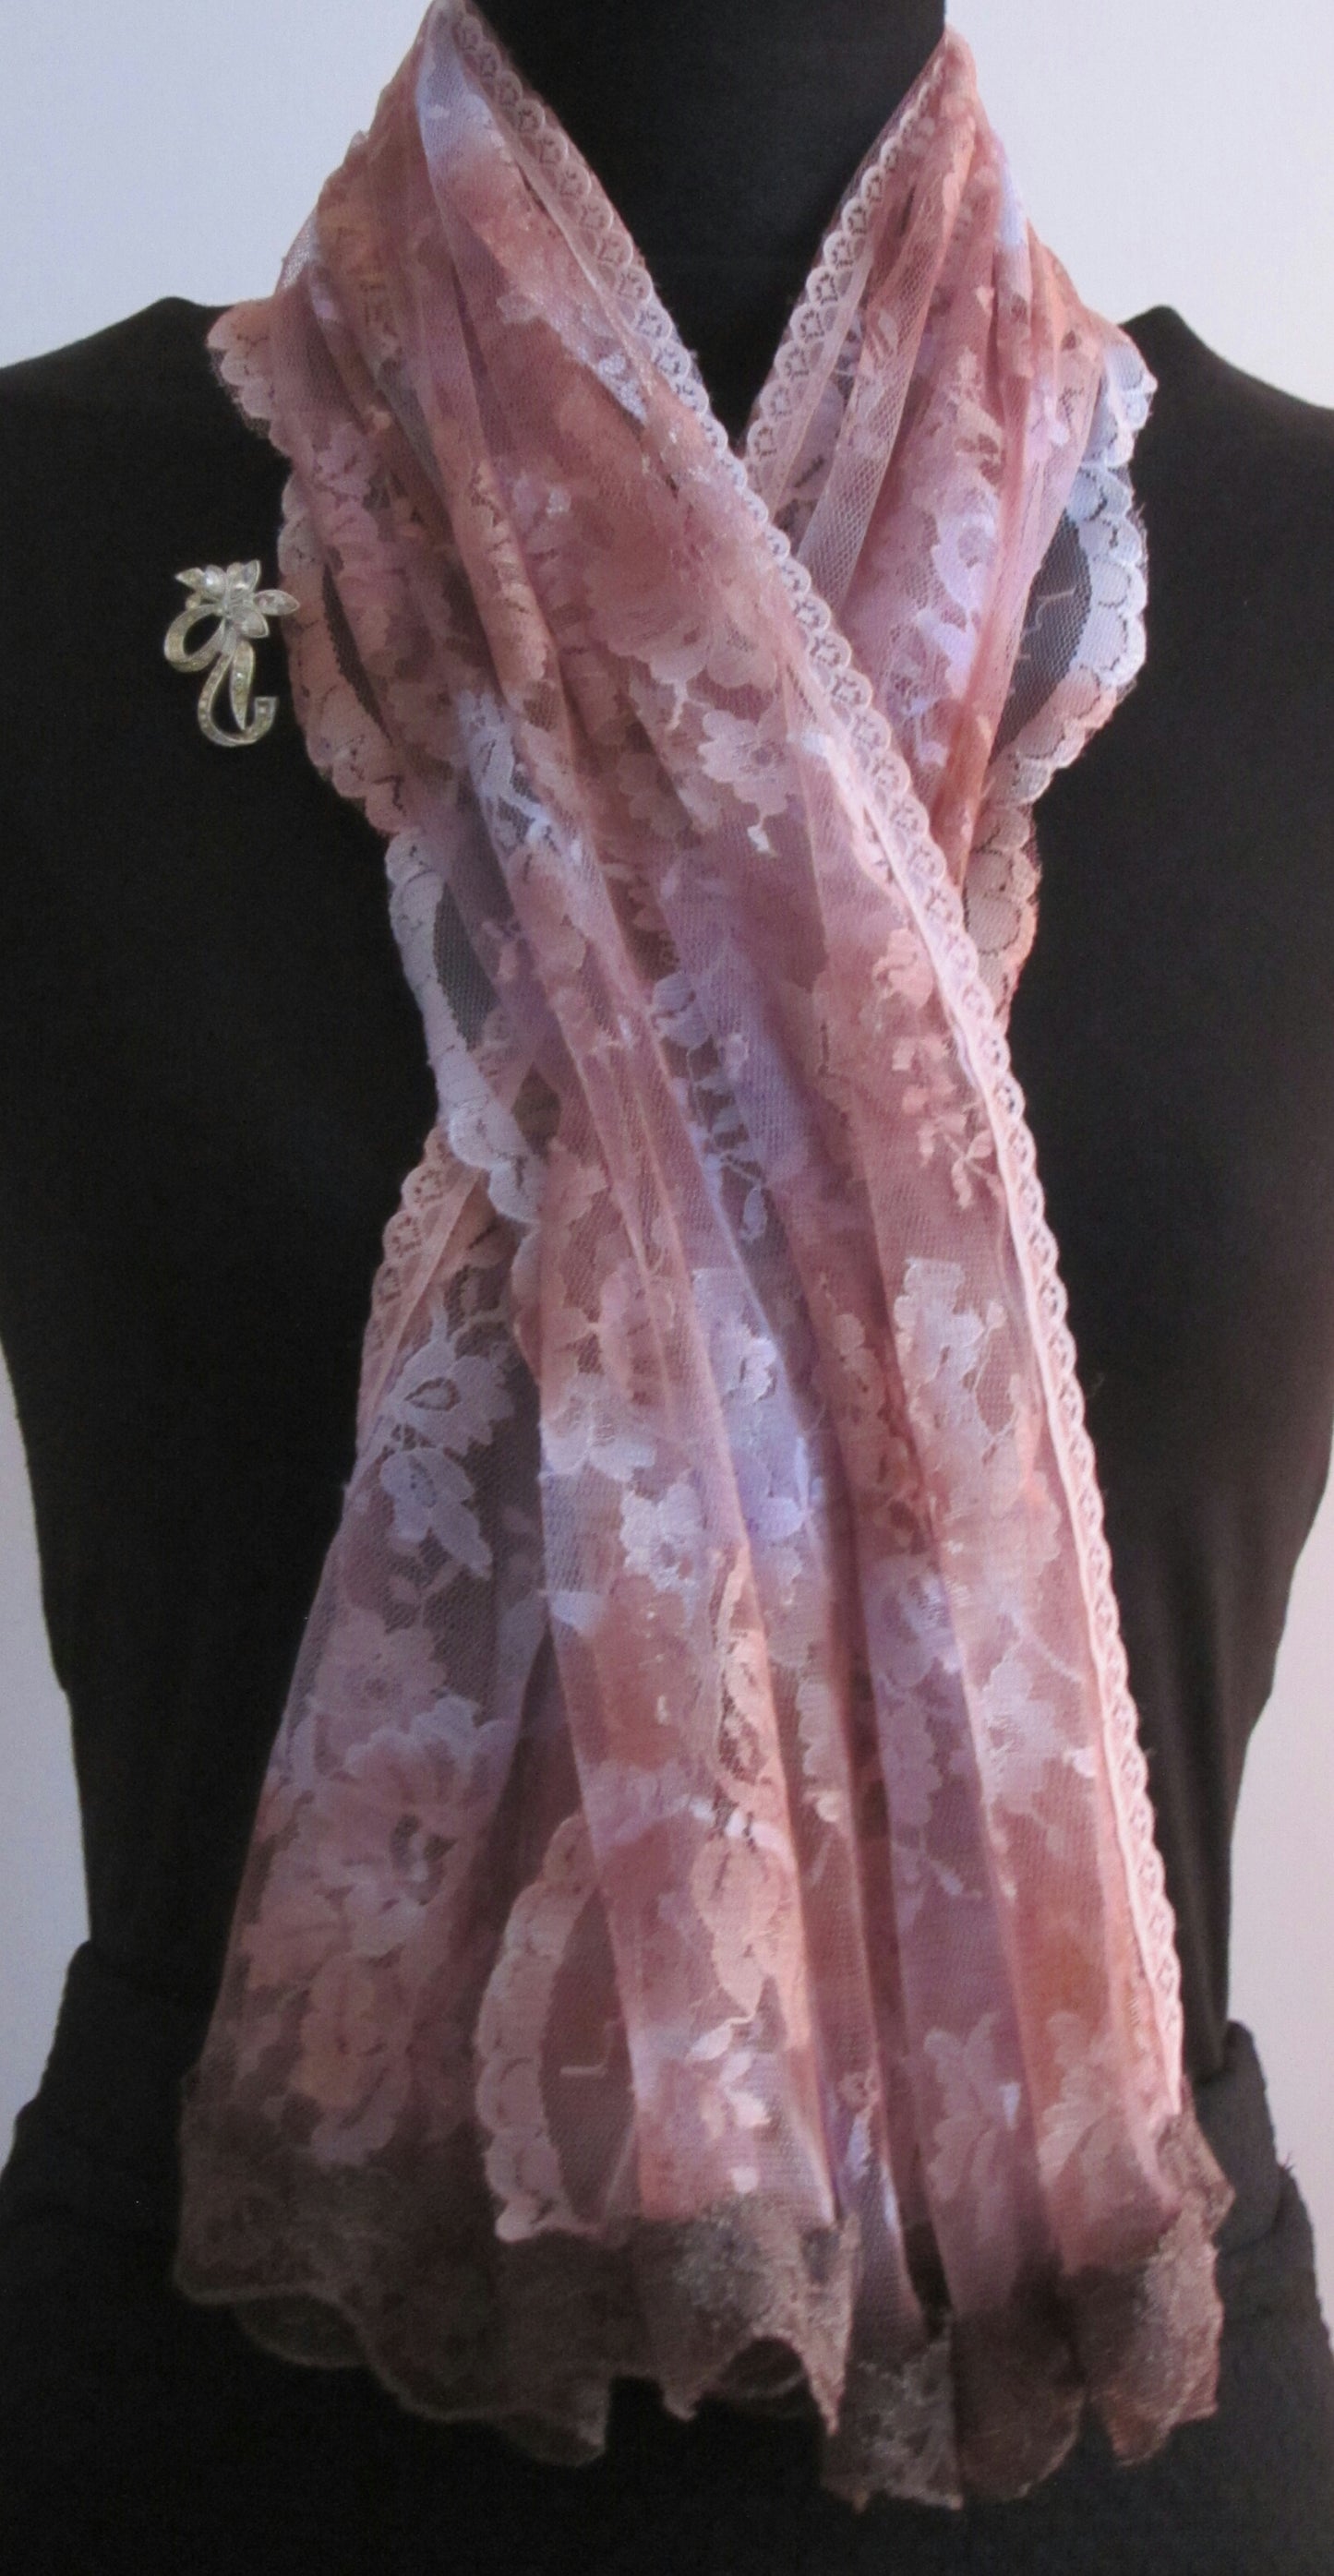 Ladies Luxury Tie Dye Effect Lace Scarf with Lace Trim